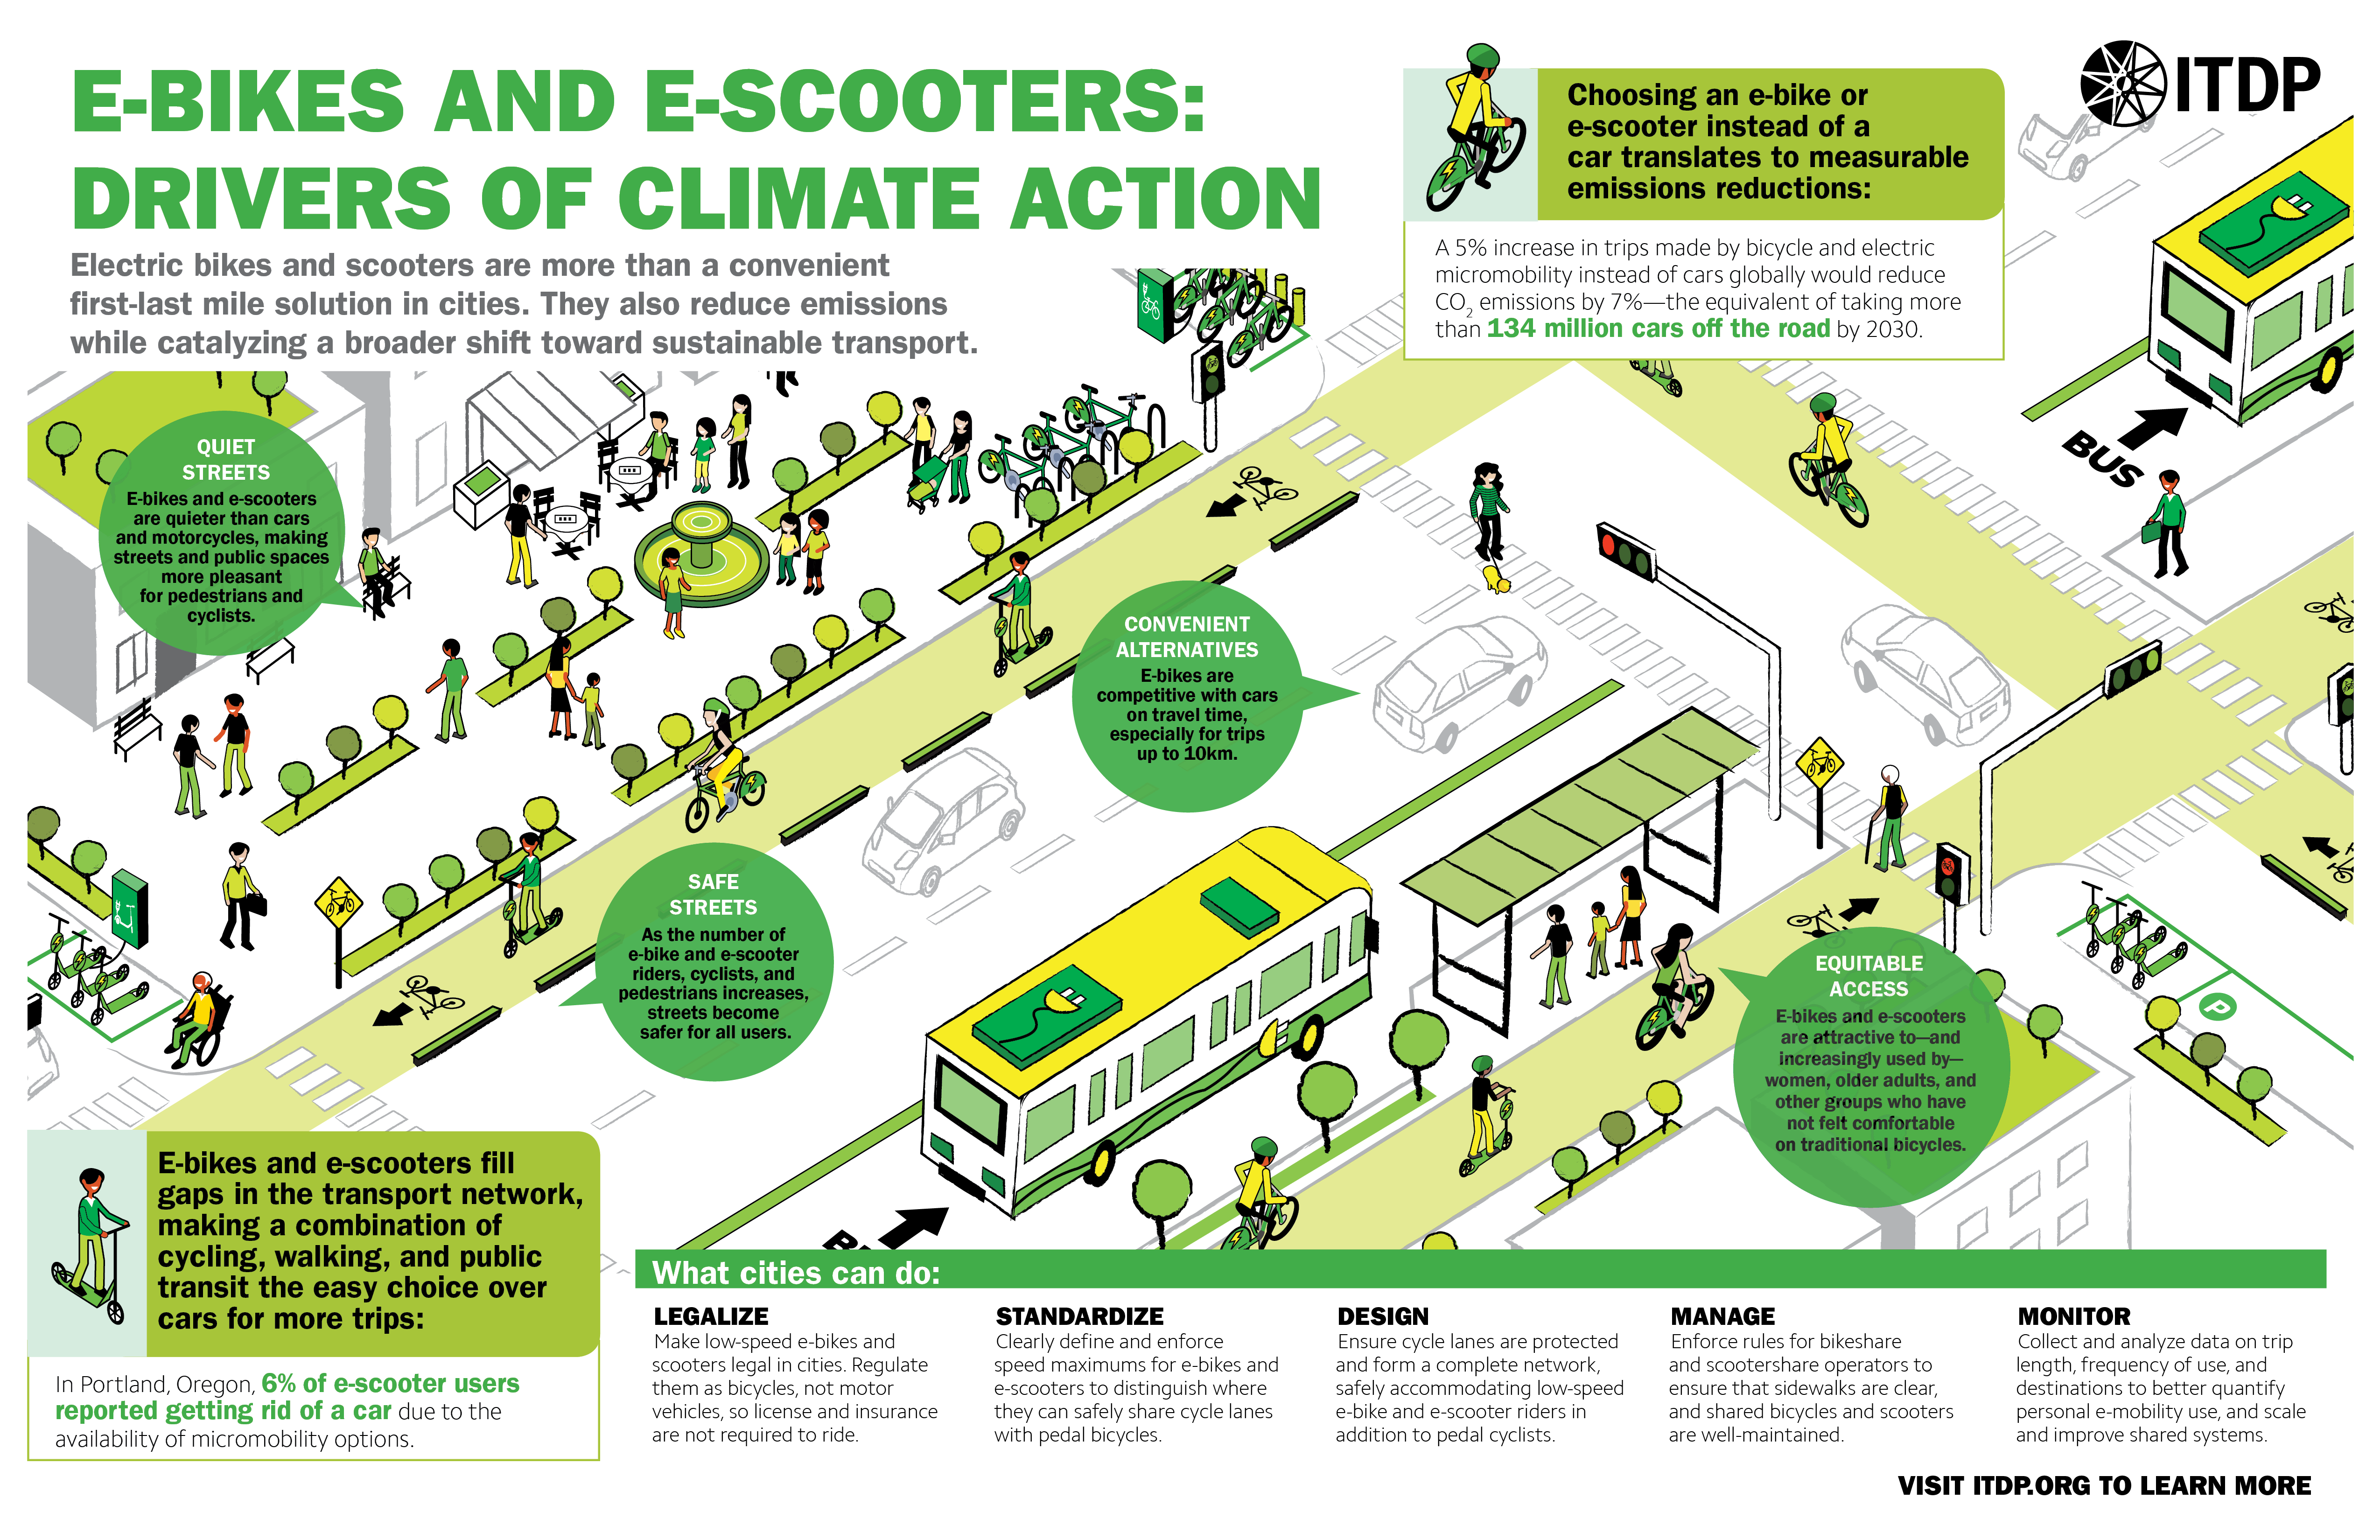 E-Bikes & E-Scooters: Drivers of Climate Action